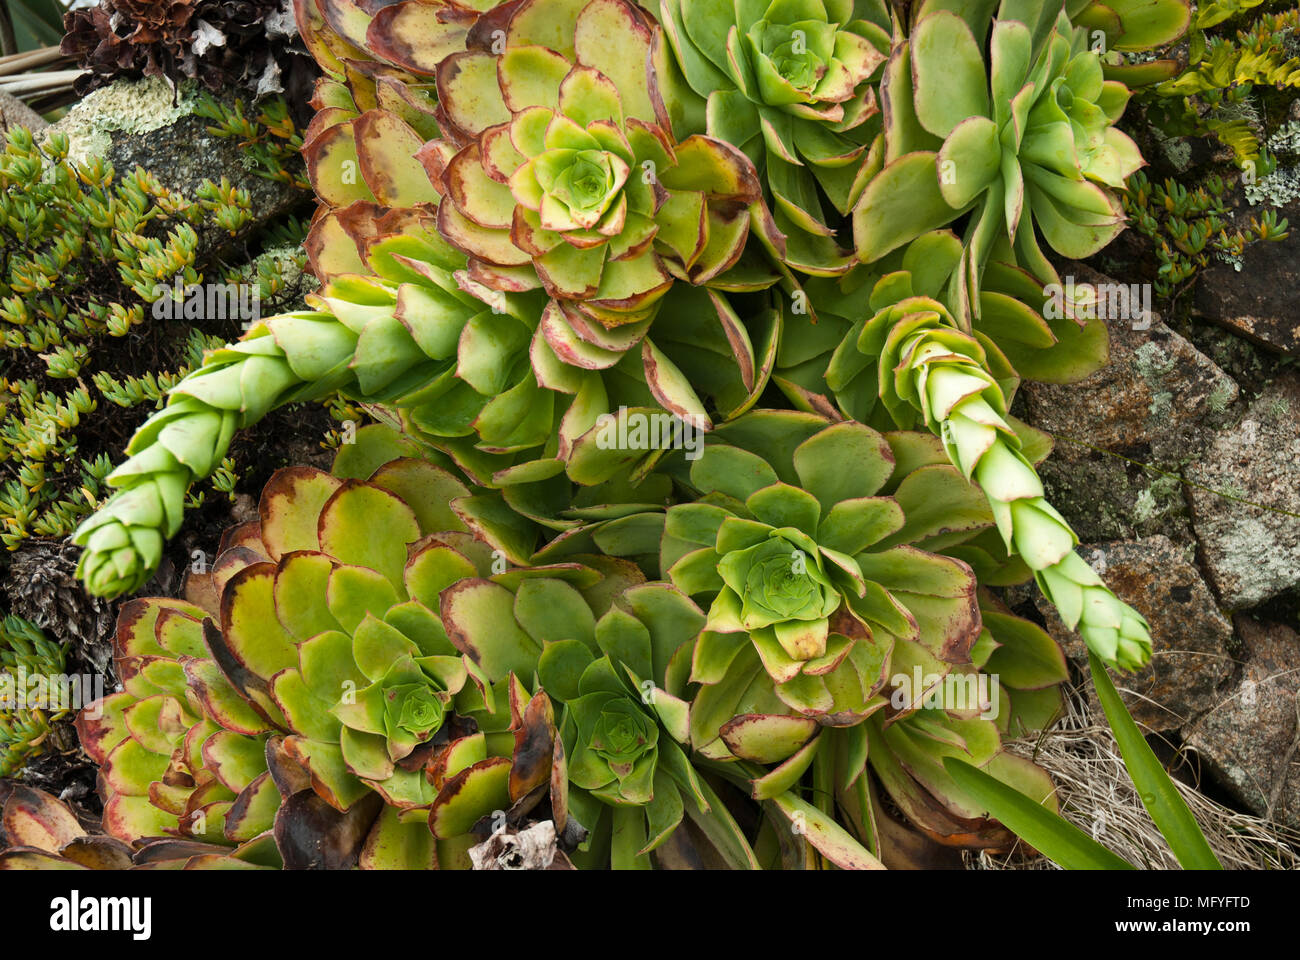 Green houseleeks, aeoniums, growing on a wall in the Scilly Islands with long protuberances about to flower. Stock Photo